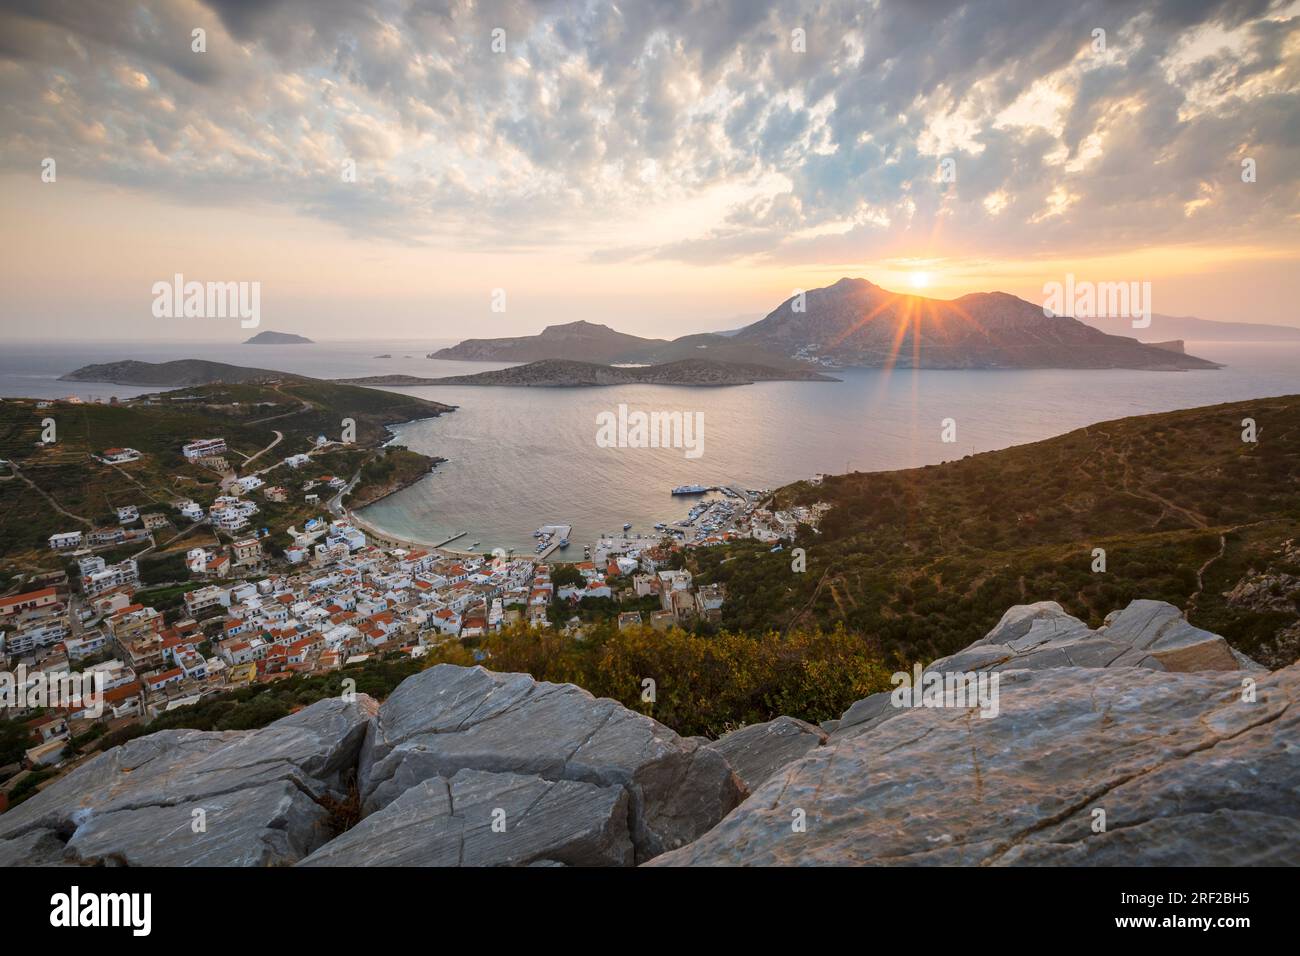 Fourni town and Thymaina island as seen from acropolis at sunset. Stock Photo